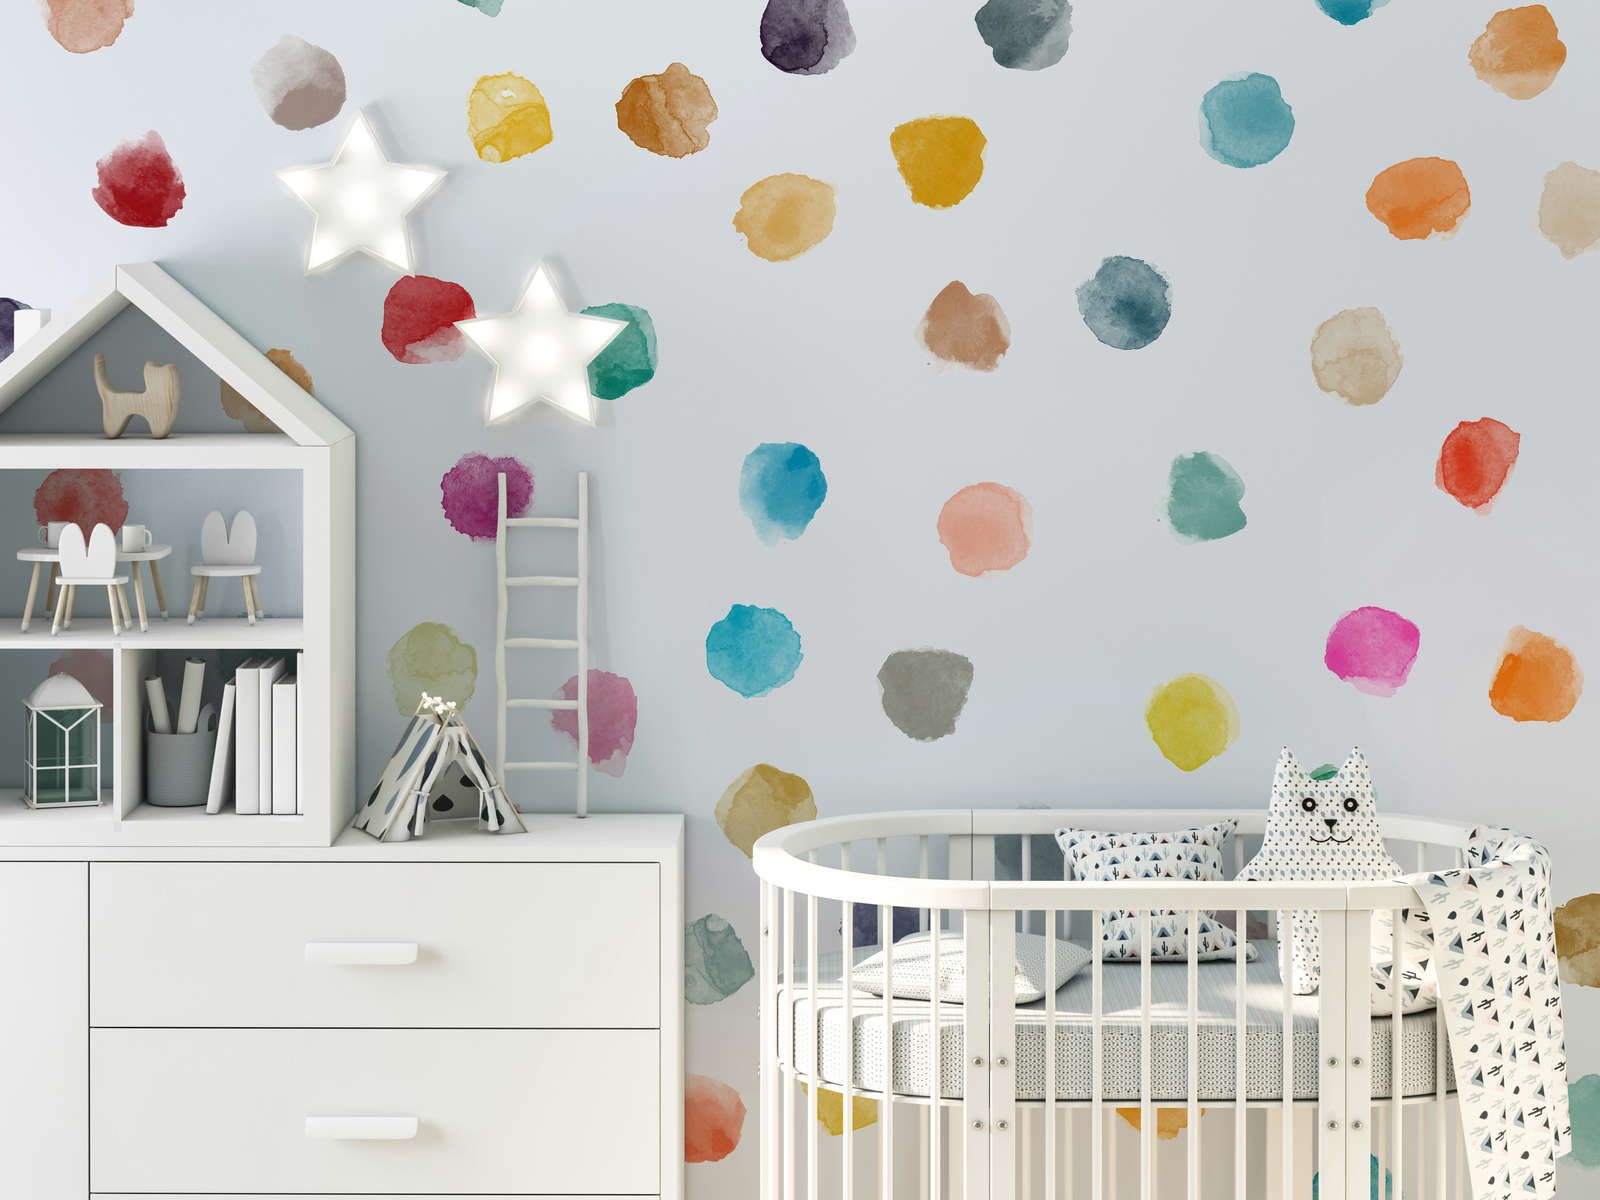             Nursery mural with colourful dots - textured non-woven
        